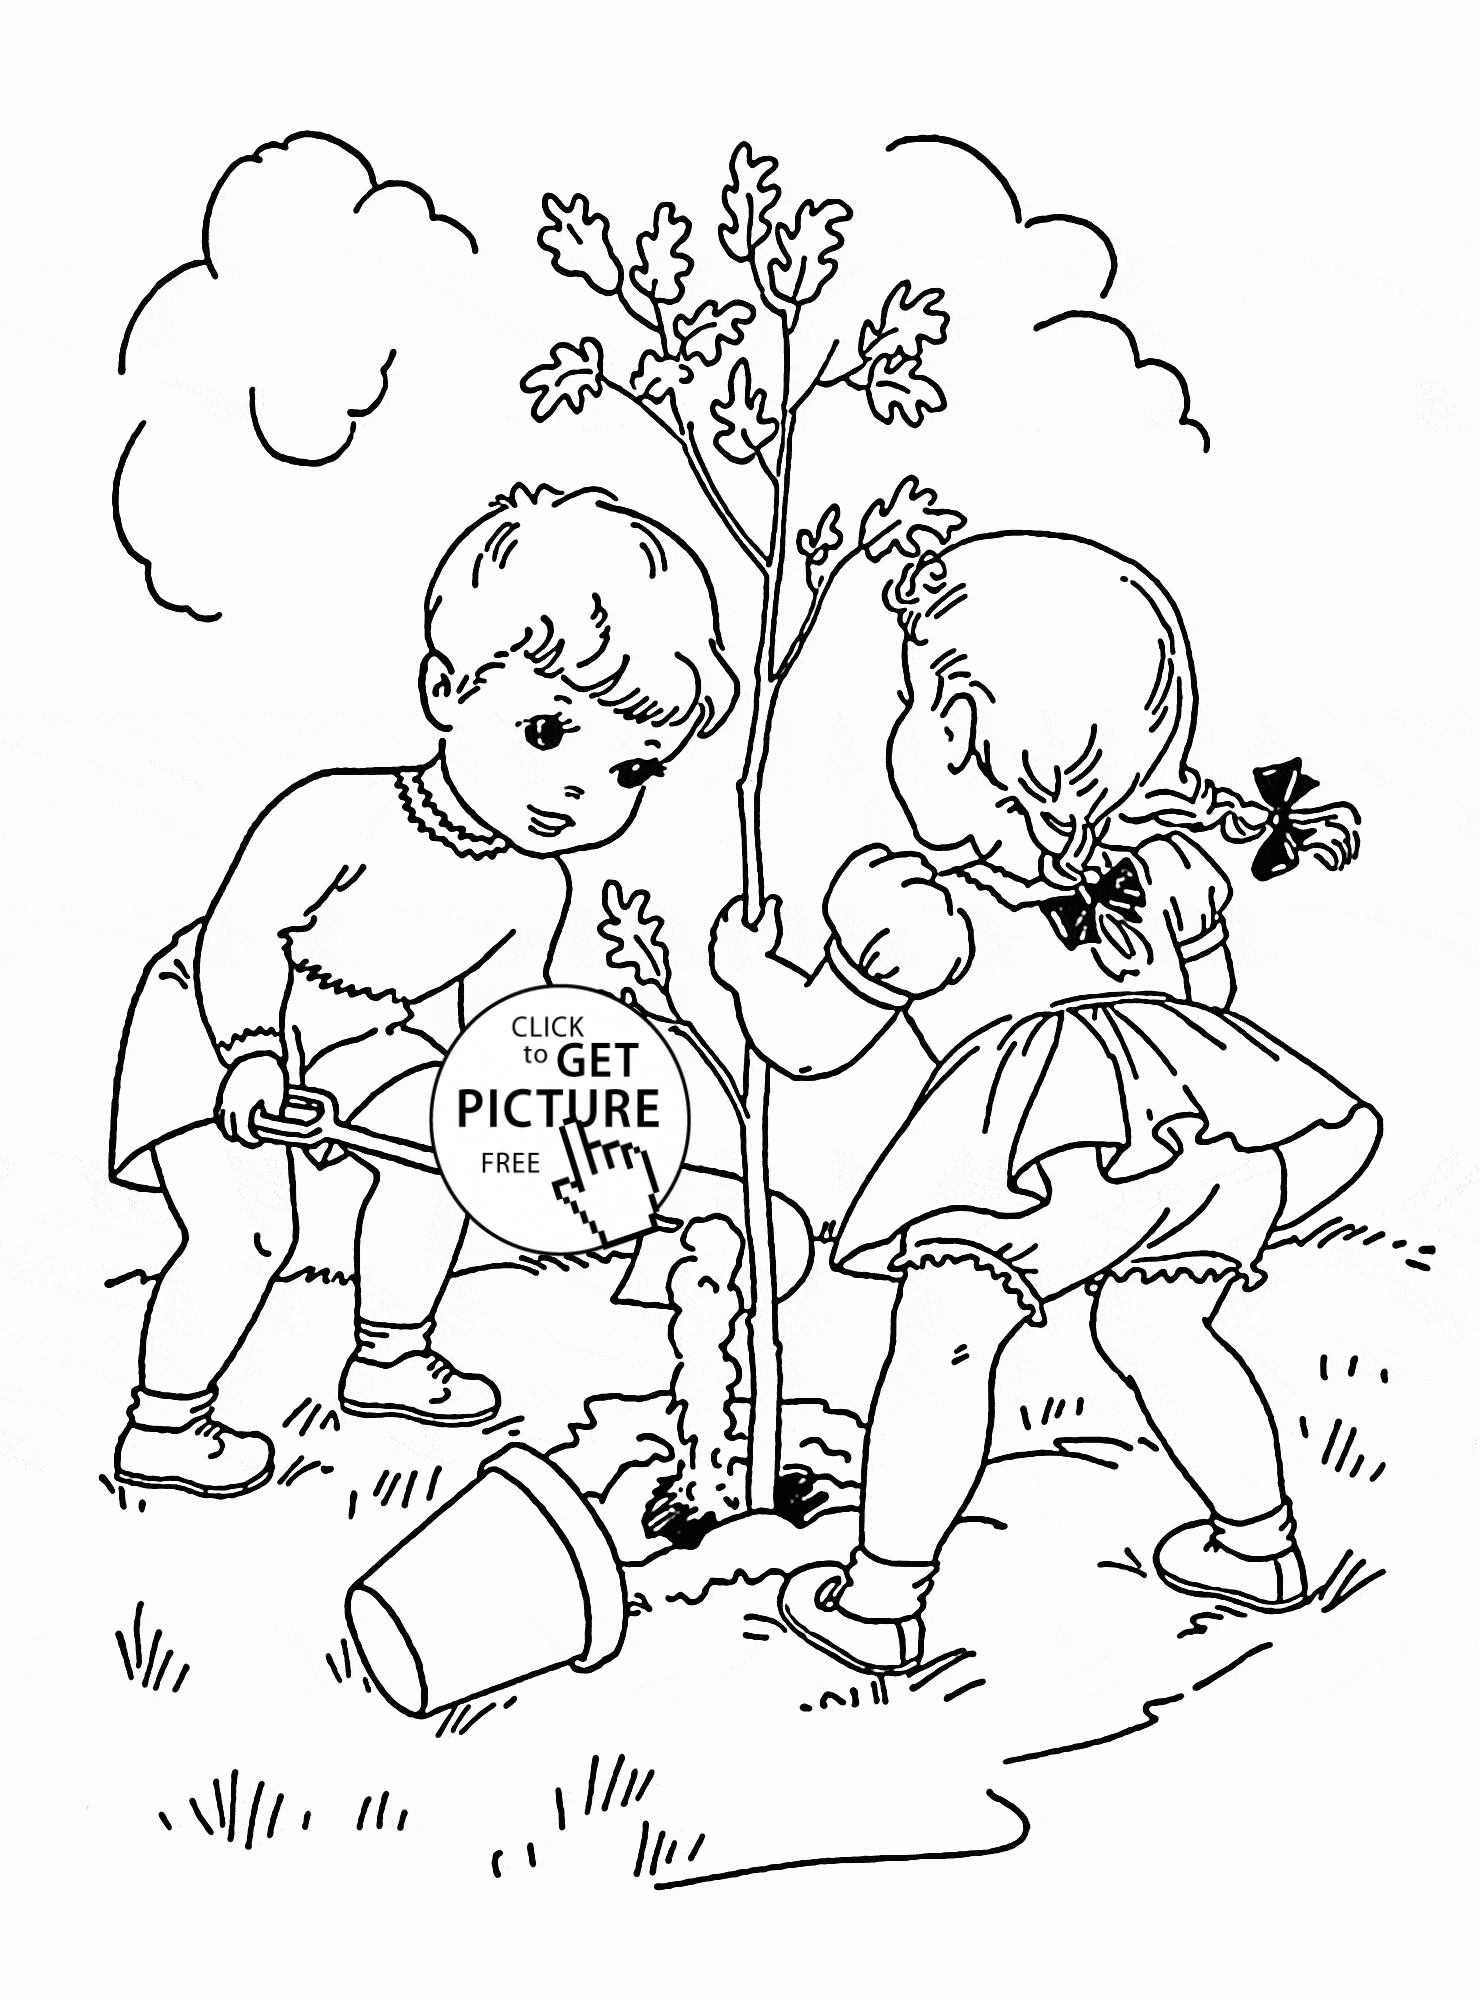 Spring Coloring Pages For Toddlers Children Plant Tree Coloring Page For Kids Spring Coloring Pages